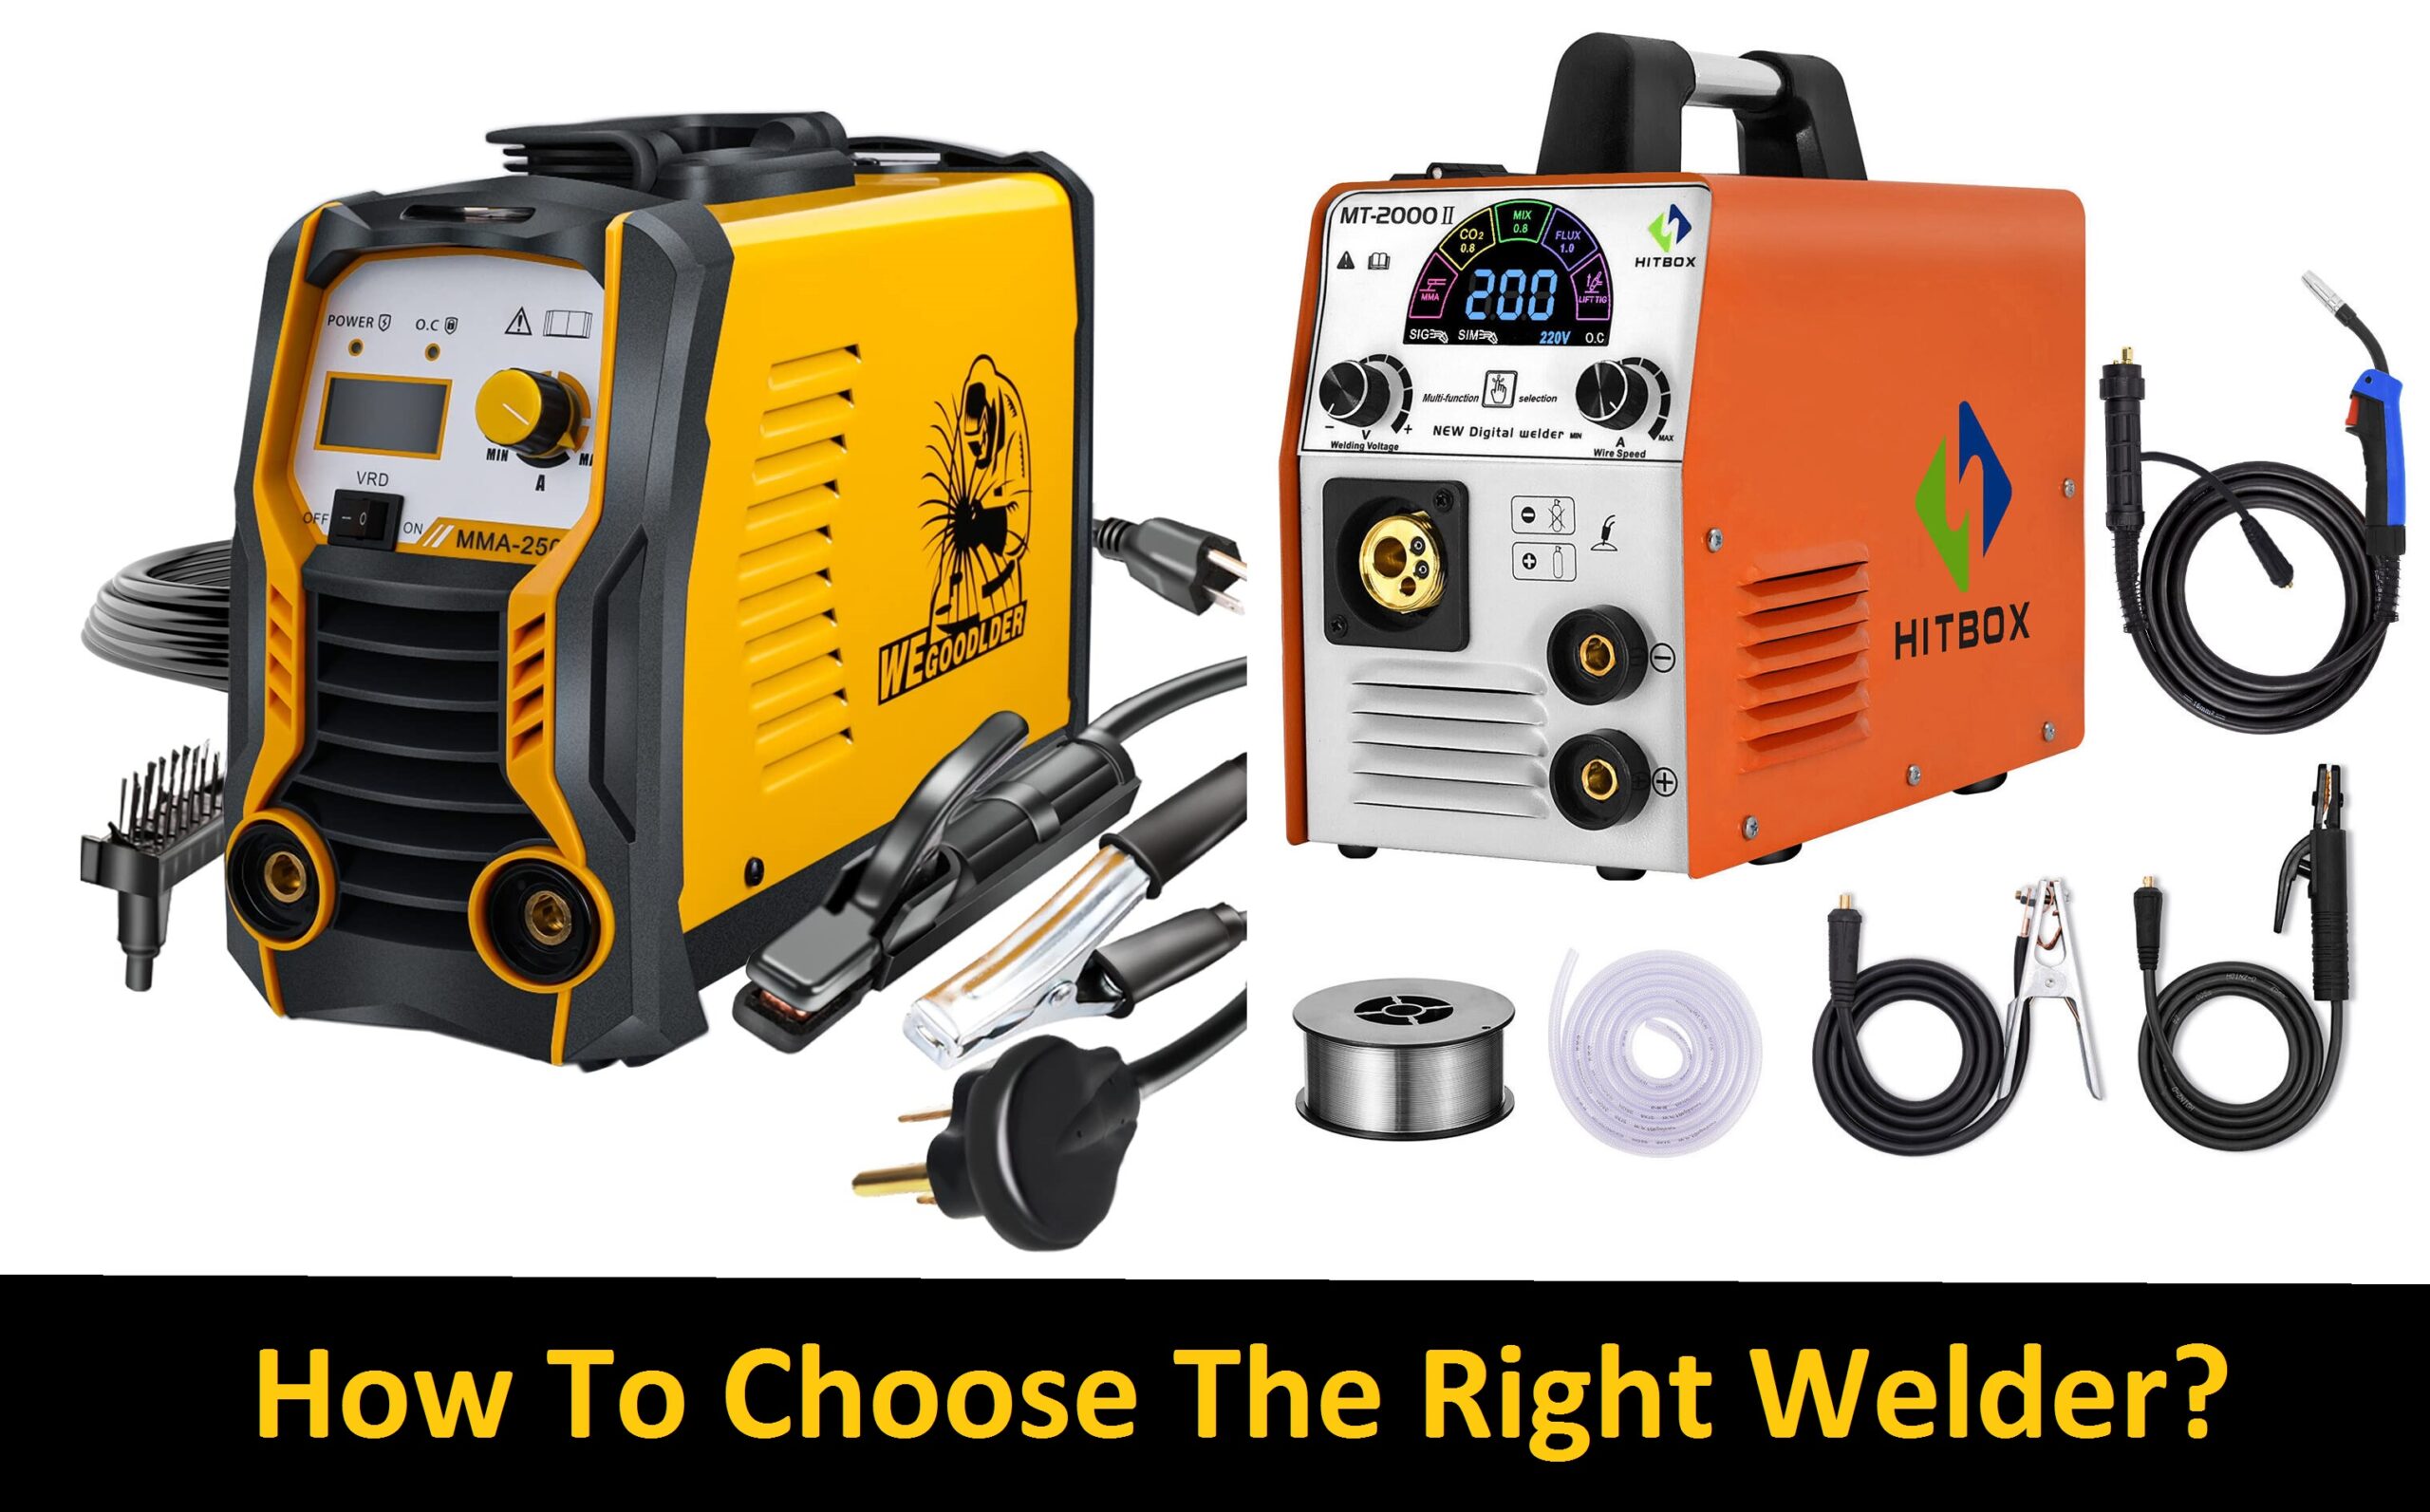 How To Choose The Right Welder